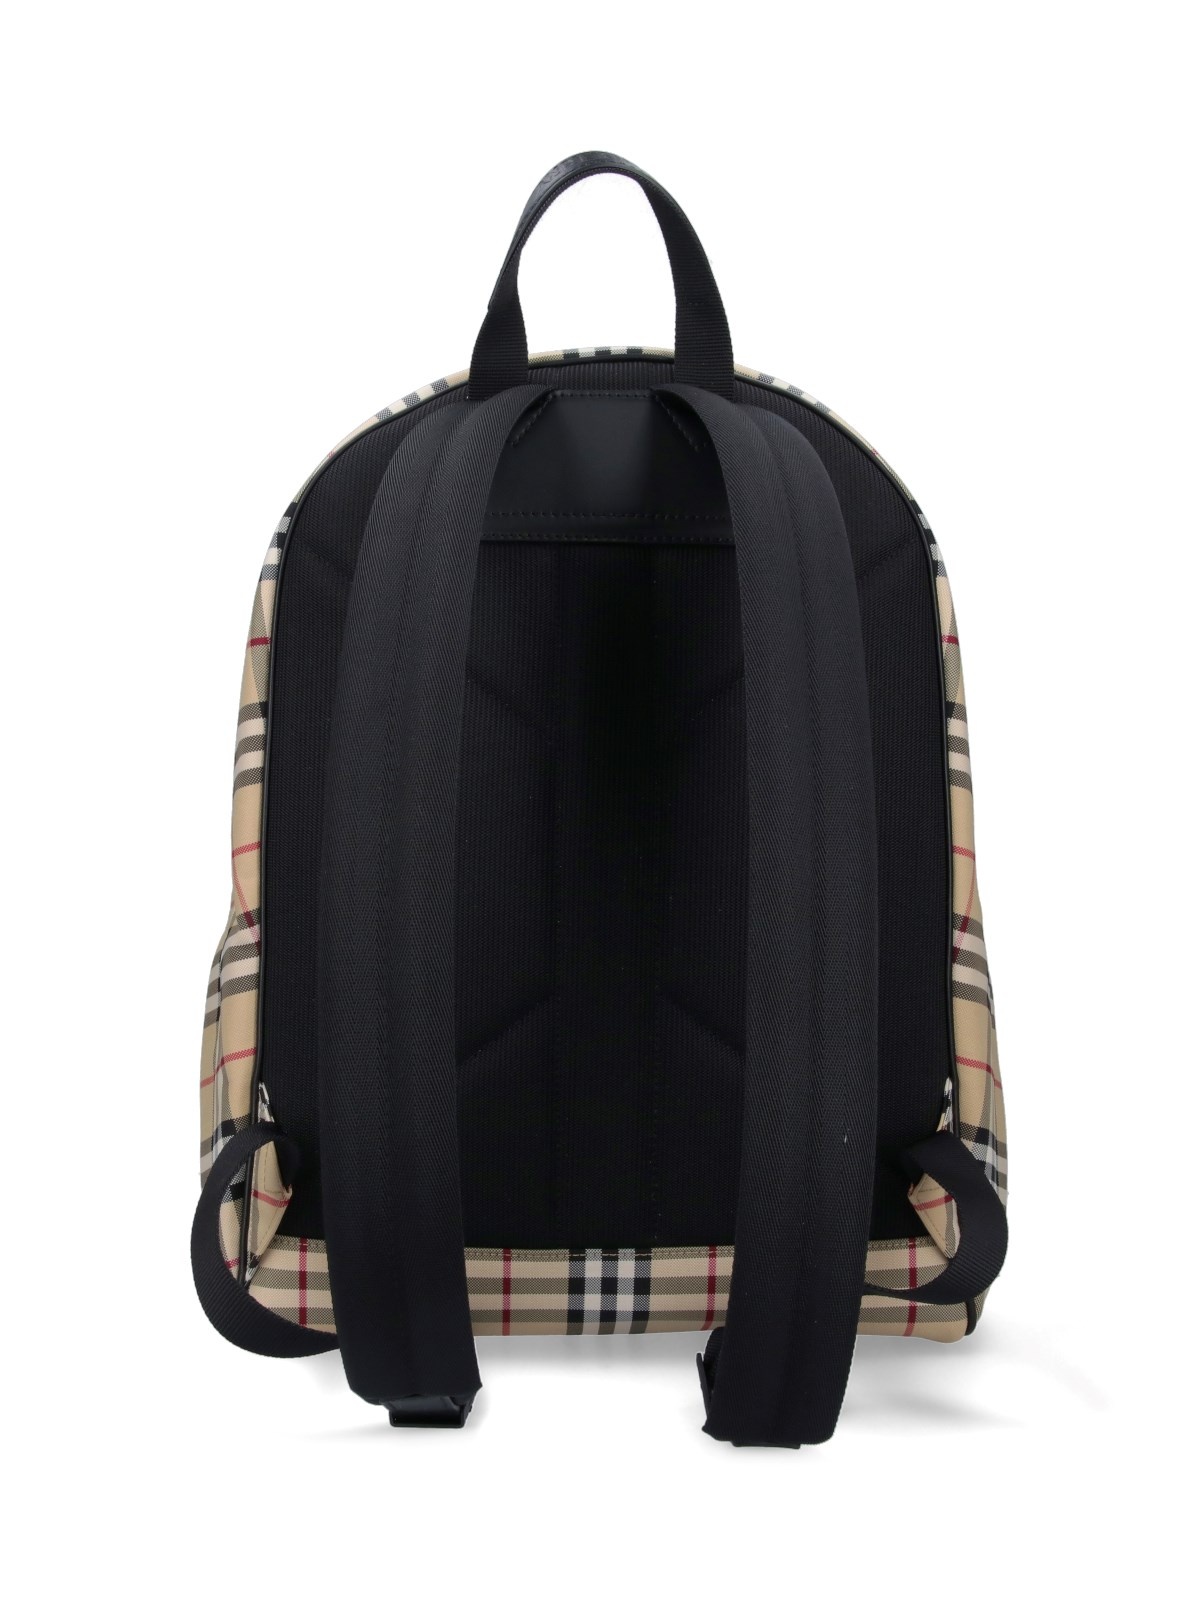 'CHECK' BACKPACK - 3